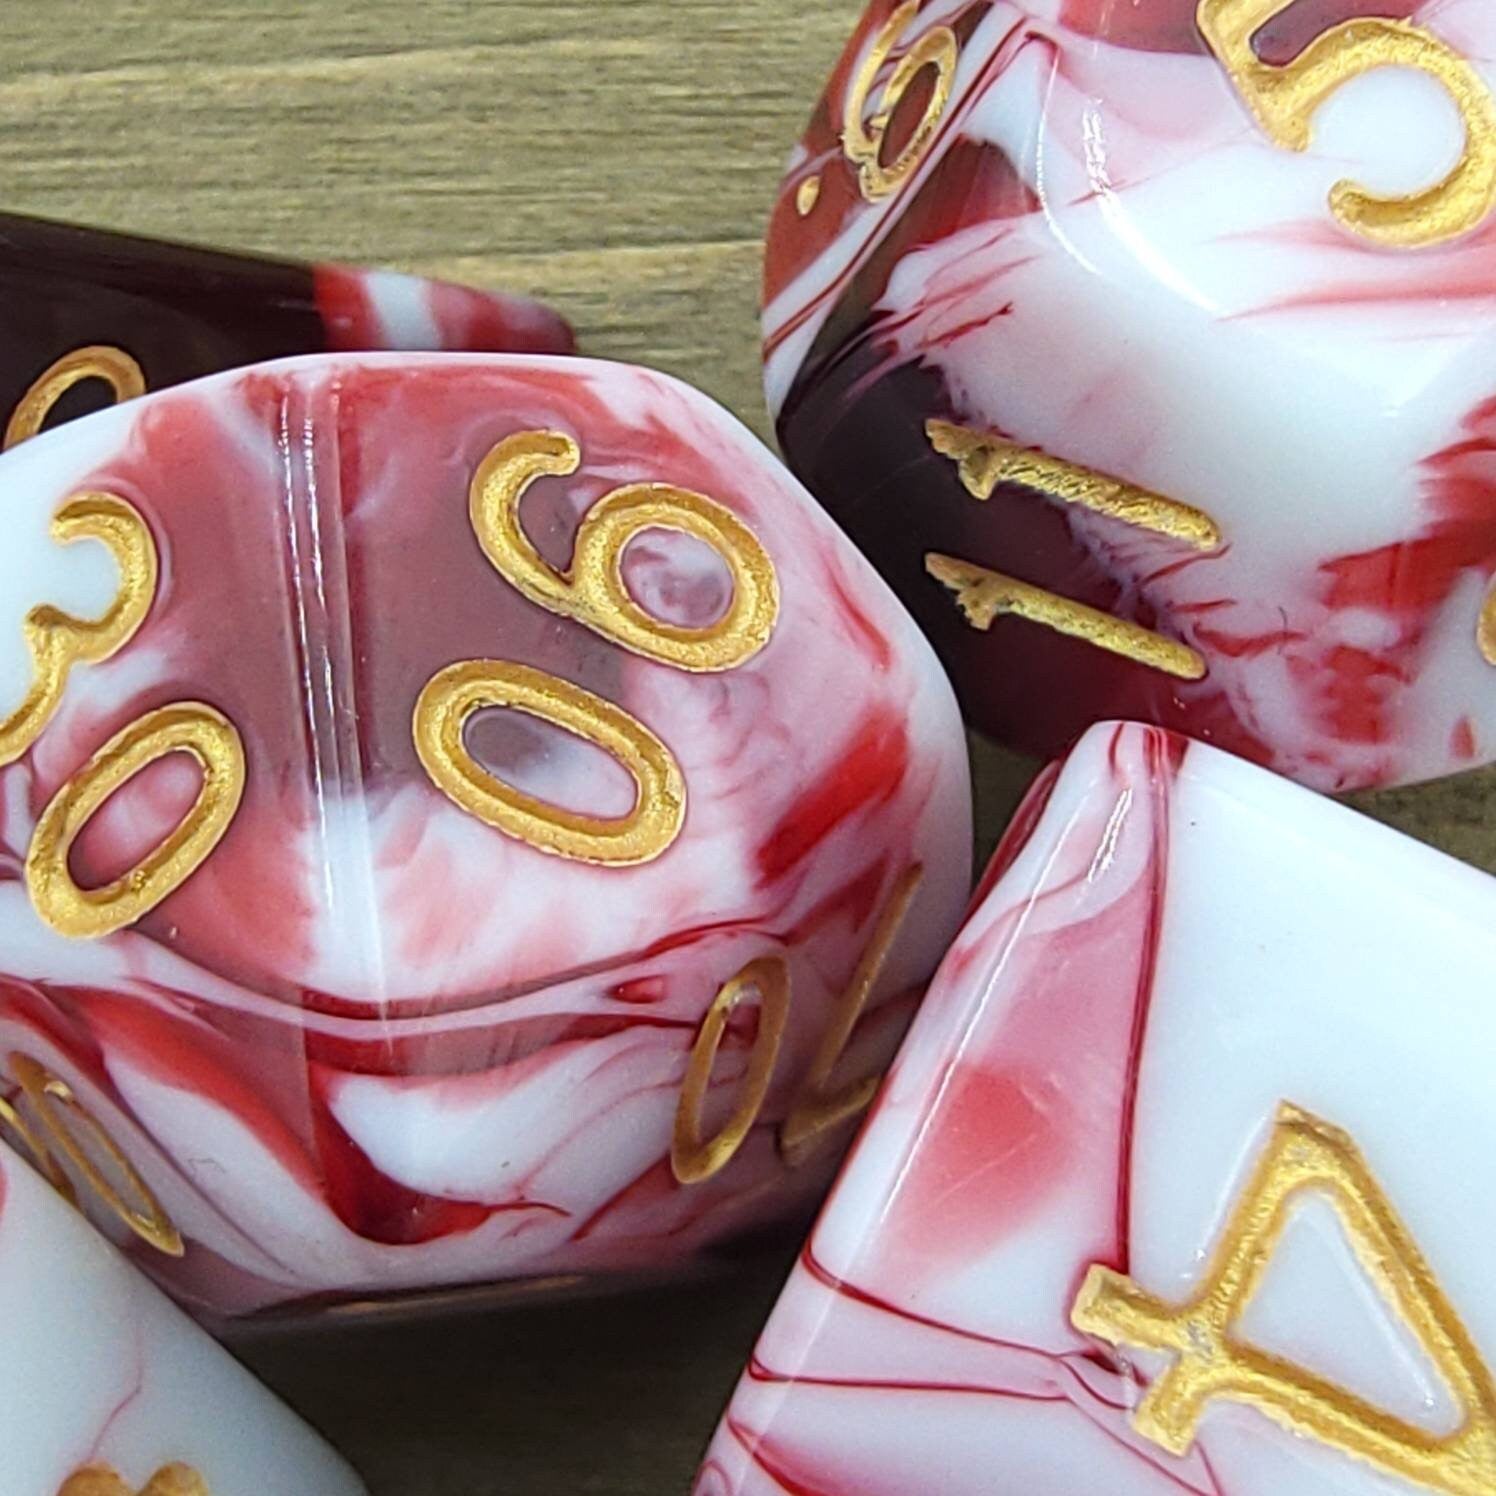 Cherry Swirl | RPG Dice Set| RPG Dice | Polyhedral Dice Set | Dungeons and Dragons | DnD Dice Set | Gaming Dice Set